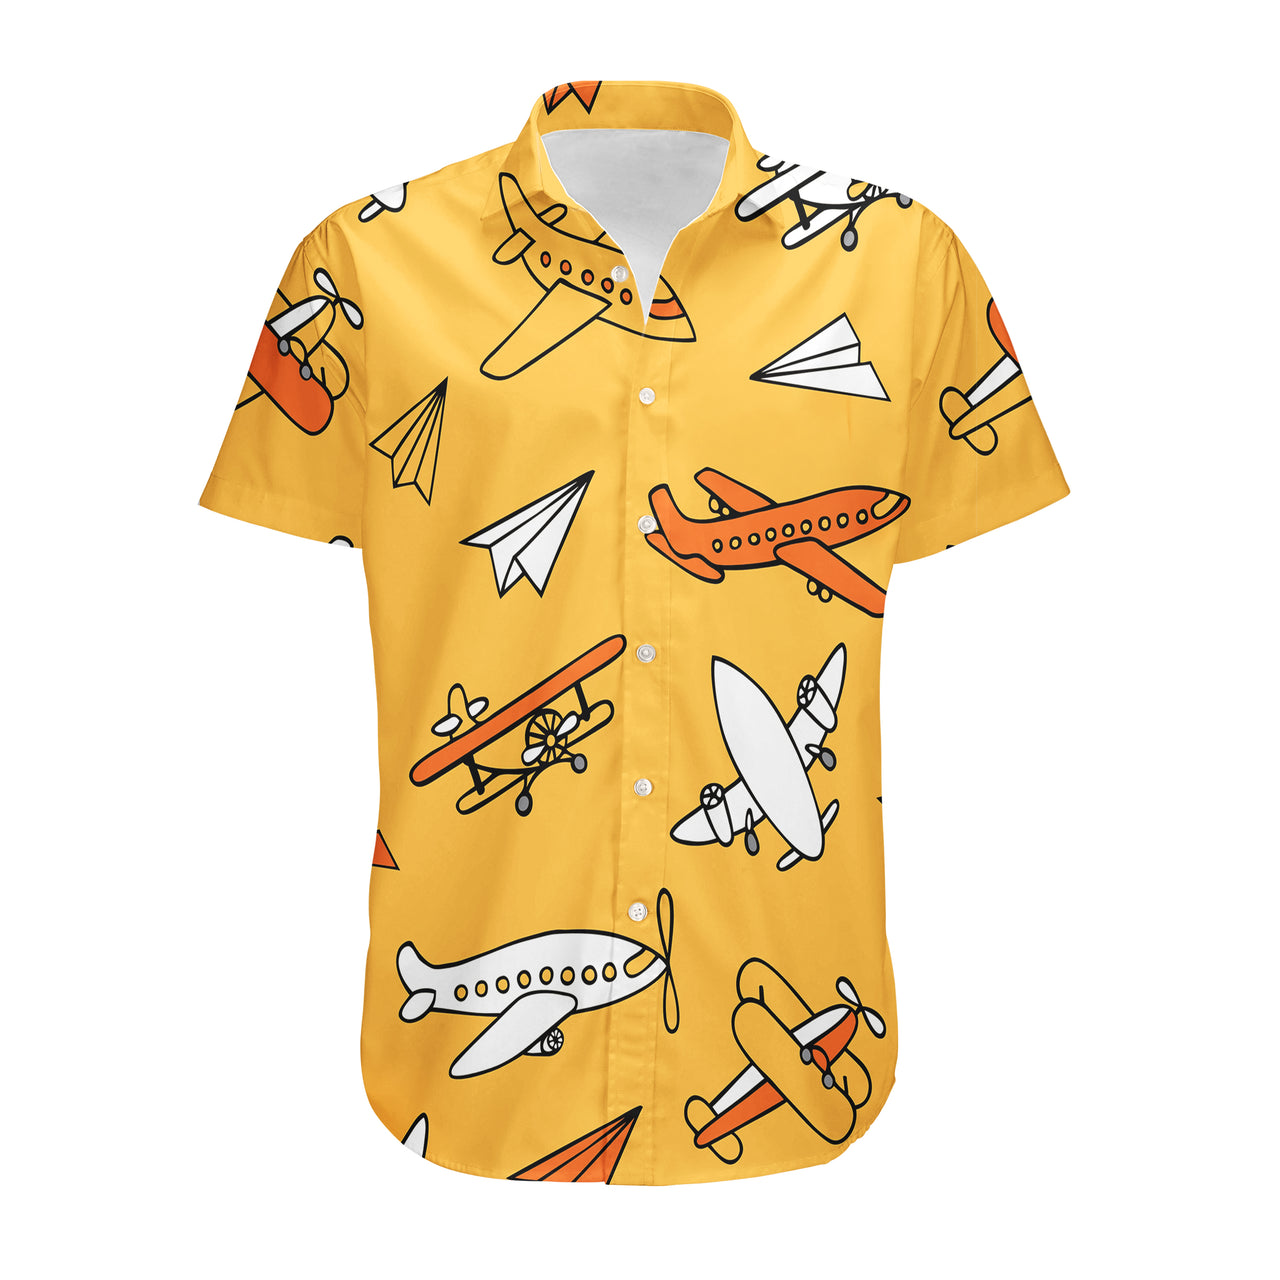 Super Drawings of Airplanes Designed 3D Shirts